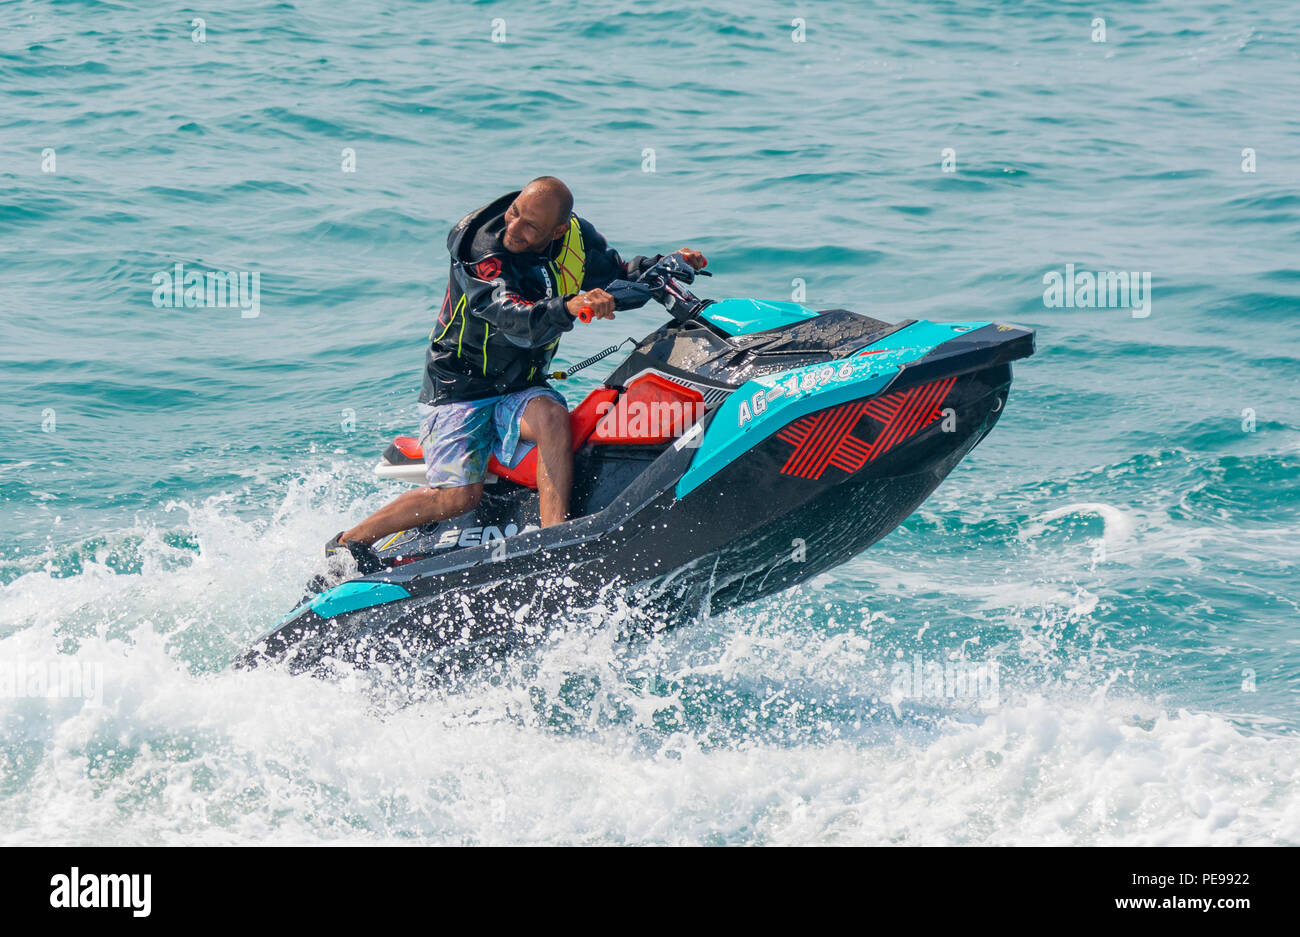 A man riding a jet ski on the sea.in Summer in the UK. Jet ski. Jet skiing. Stock Photo